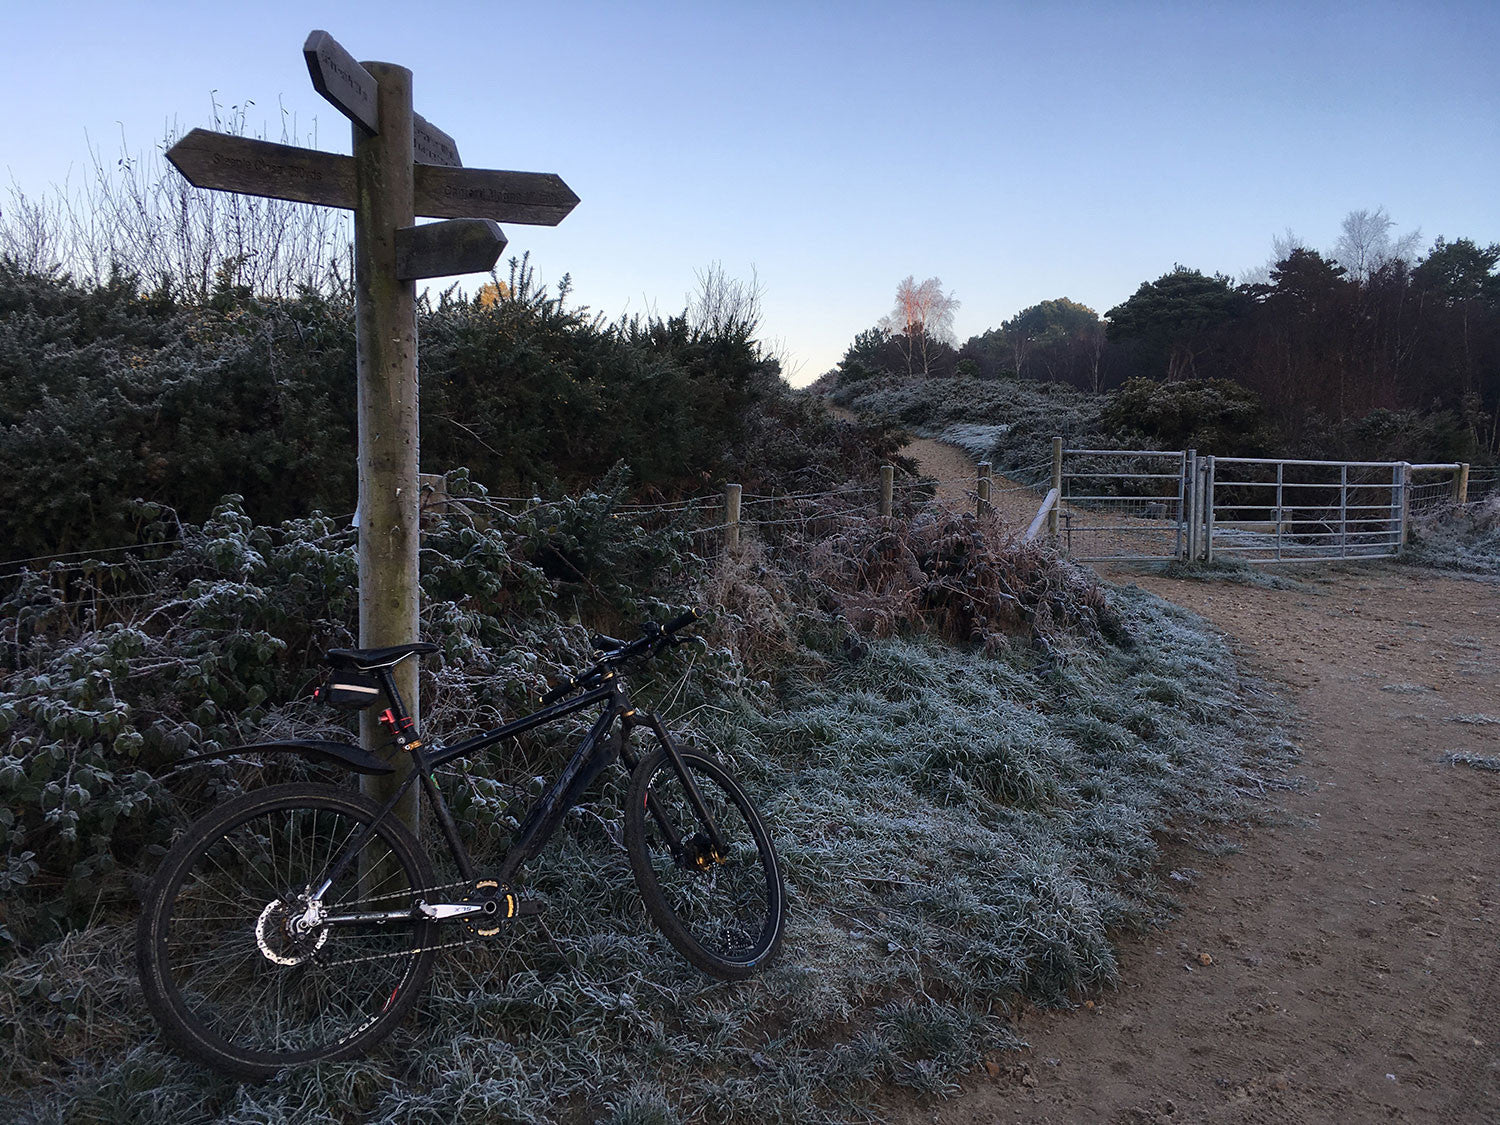 Between Christmas and New Year with some more relaxed start times I often add in an extra 30 minutes to encompass some extra miles - this is taken over Canford Heath - part of the Bourne Valley Greenway.